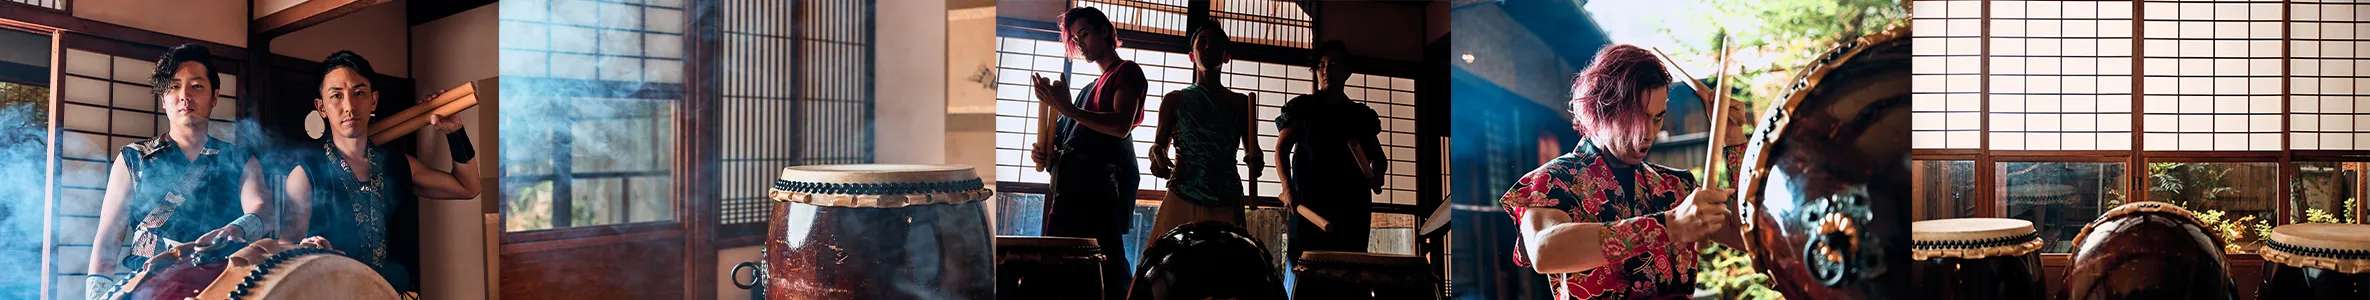 A popular Japanese activity. Travelers can experience the Japanese drums at the Taiko Center.